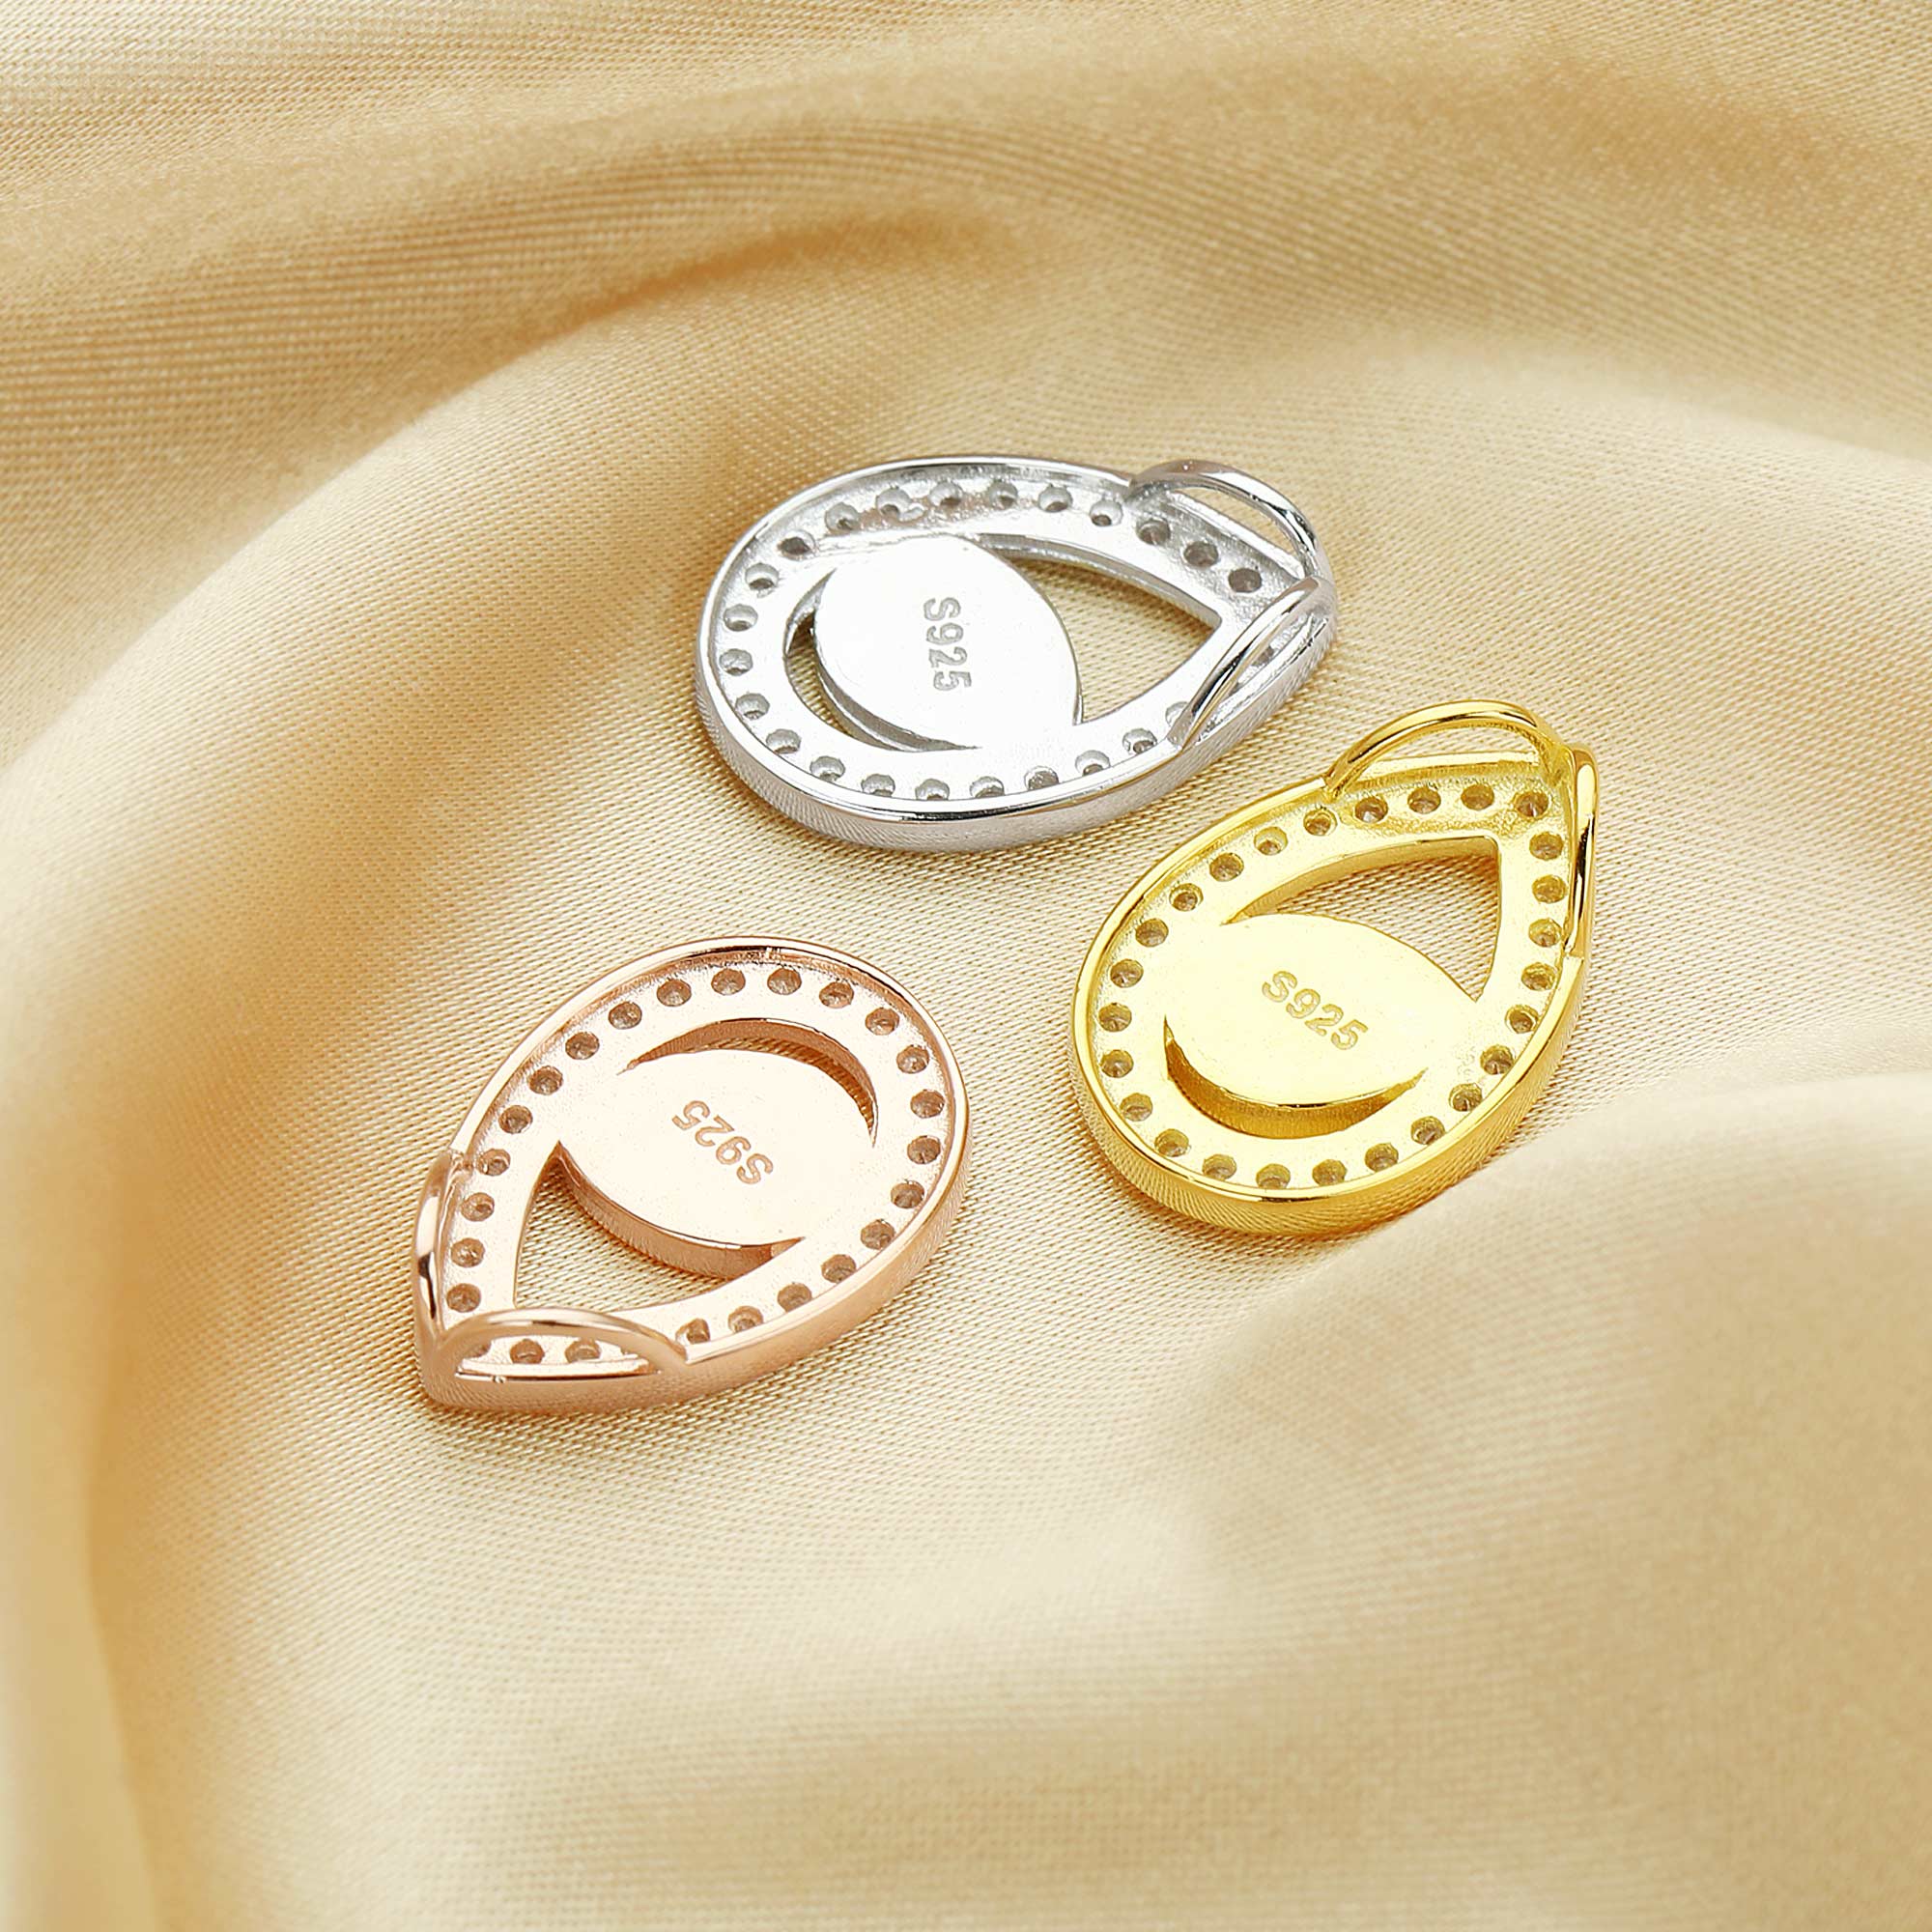 6x8MM Keepsake Breast Milk Bezel Pear Pendant Settings,Art Deco Solid 925 Sterling Silver Rose Gold Plated Pendant Charm,DIY Memory Jewelry Supplies 1431146 - Click Image to Close